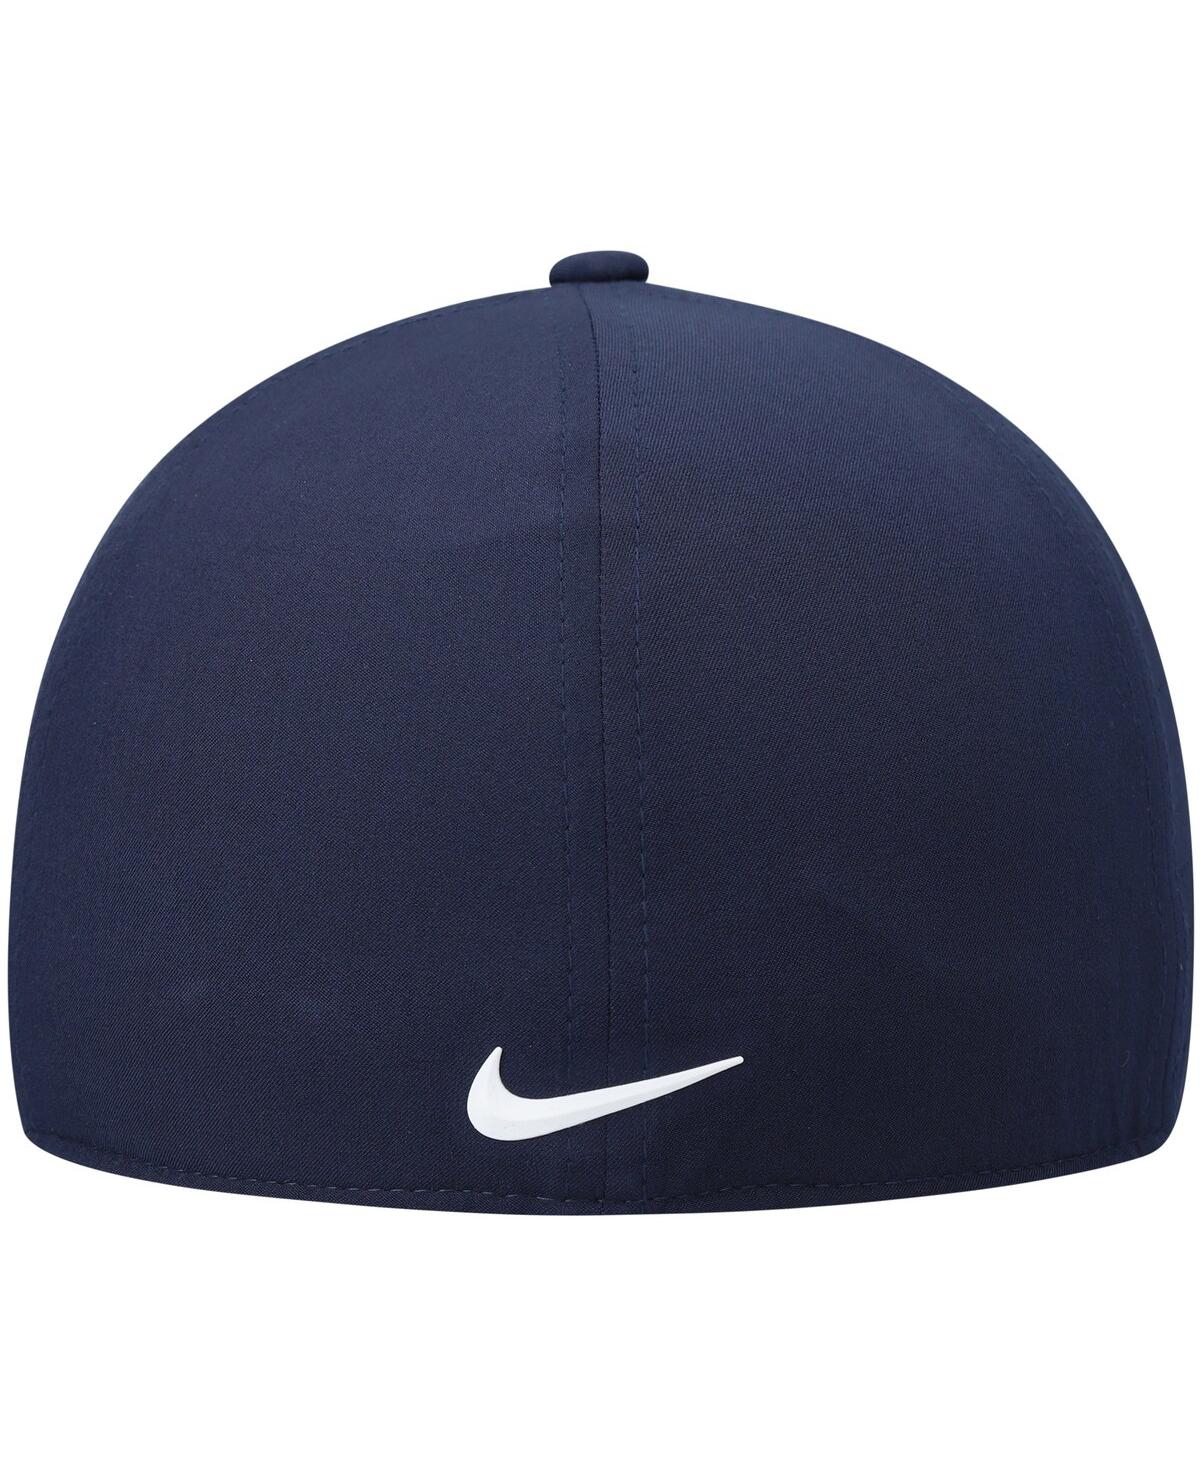 Shop Nike Men's  Golf Navy Aerobill Classic99 Performance Fitted Hat